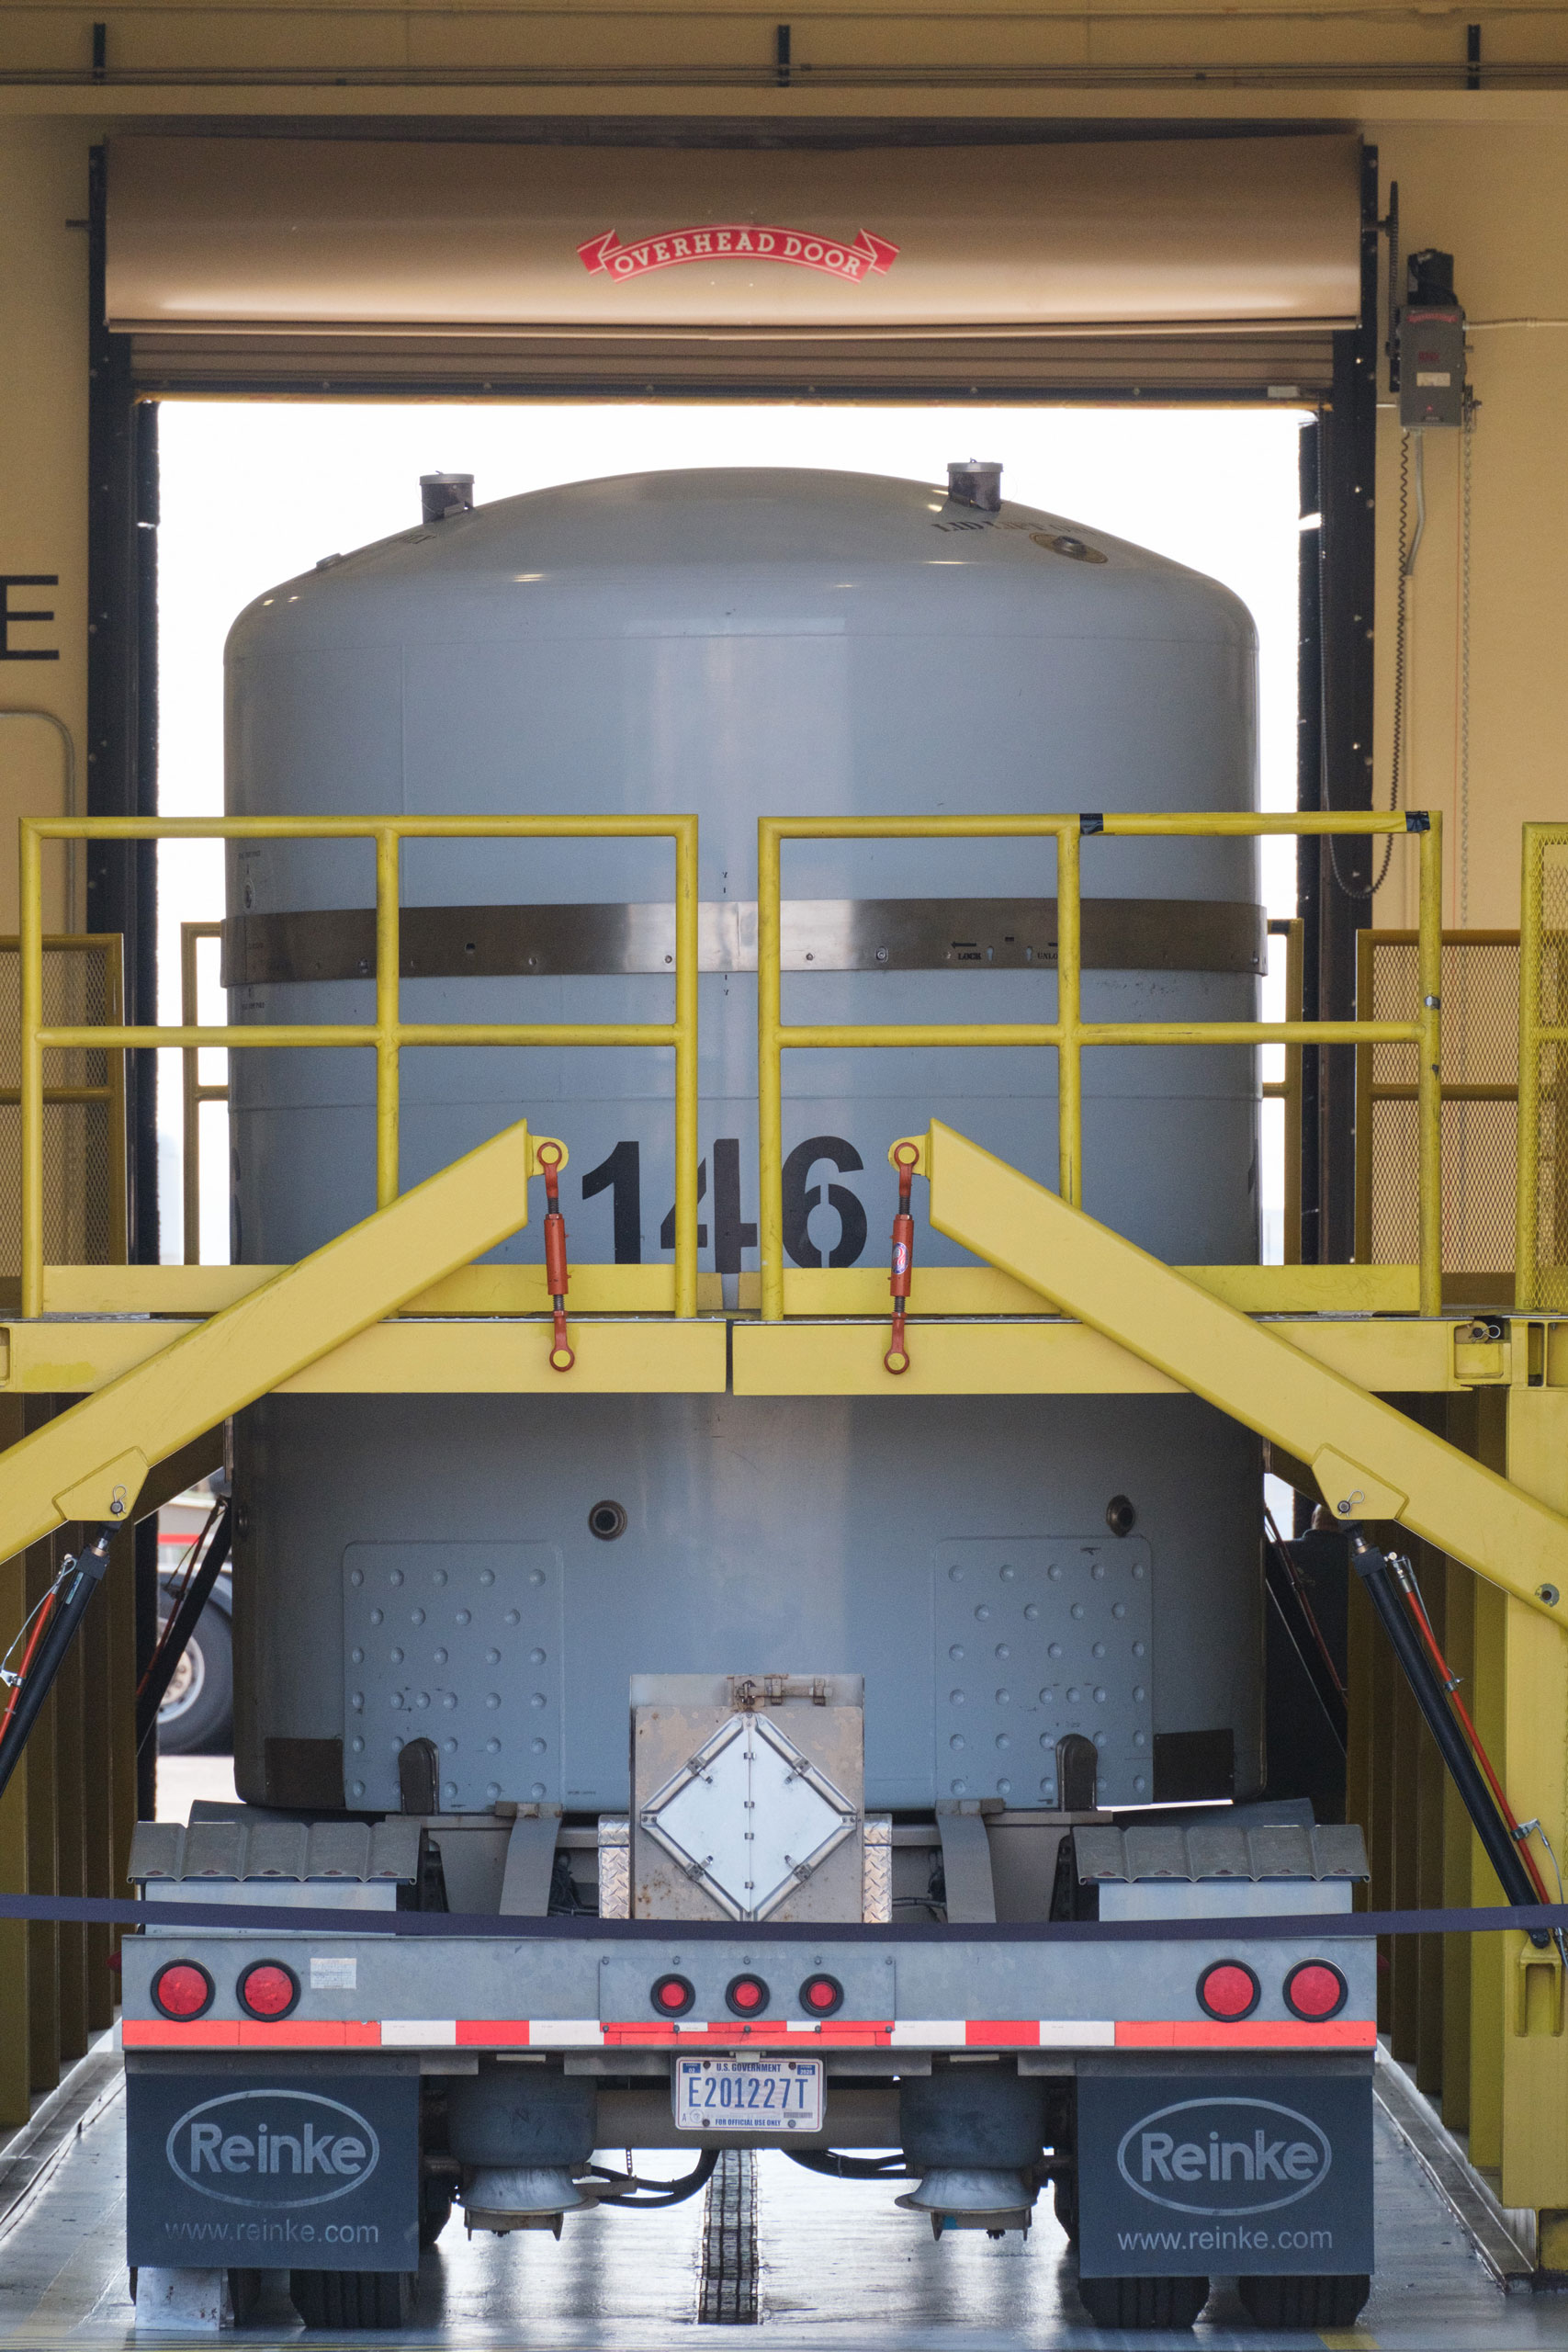 Radioactive waste transportation containers are loaded onto the beds of semi-trucks at the Radioassay and Nondestructive Testing Facility. (Ramsay de Give for TIME)